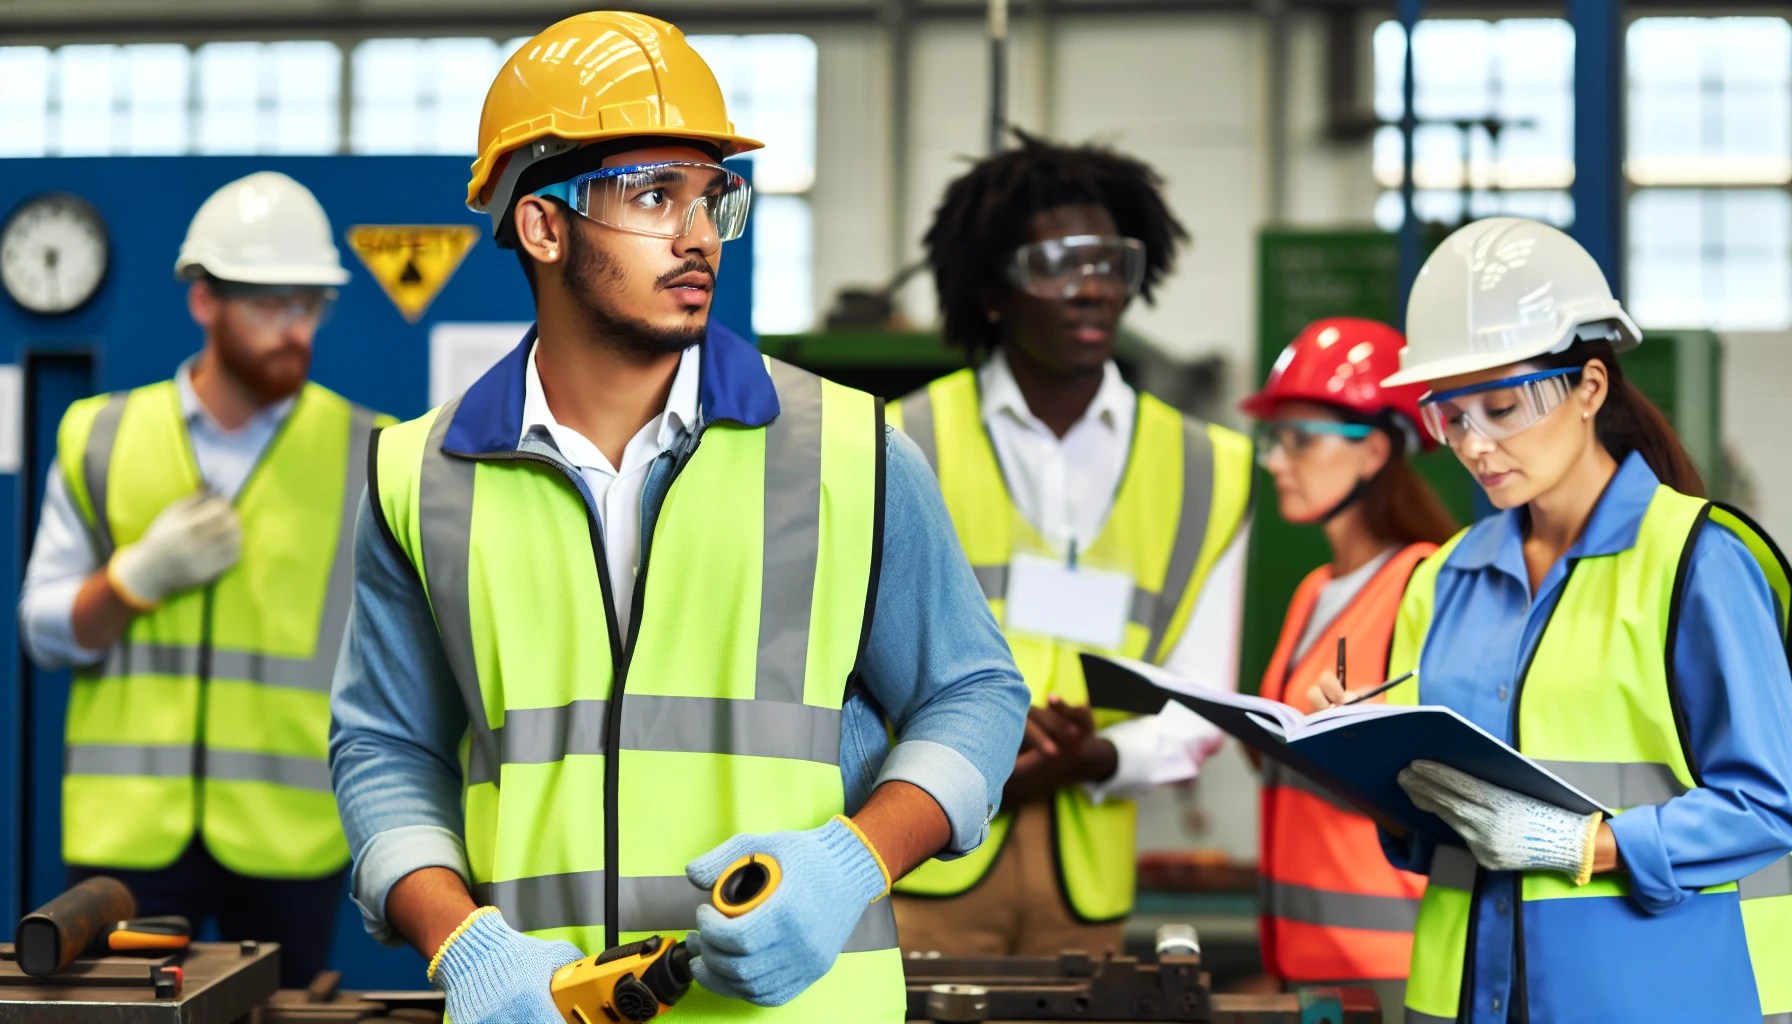 Workplace safety and injury prevention in a professional environment